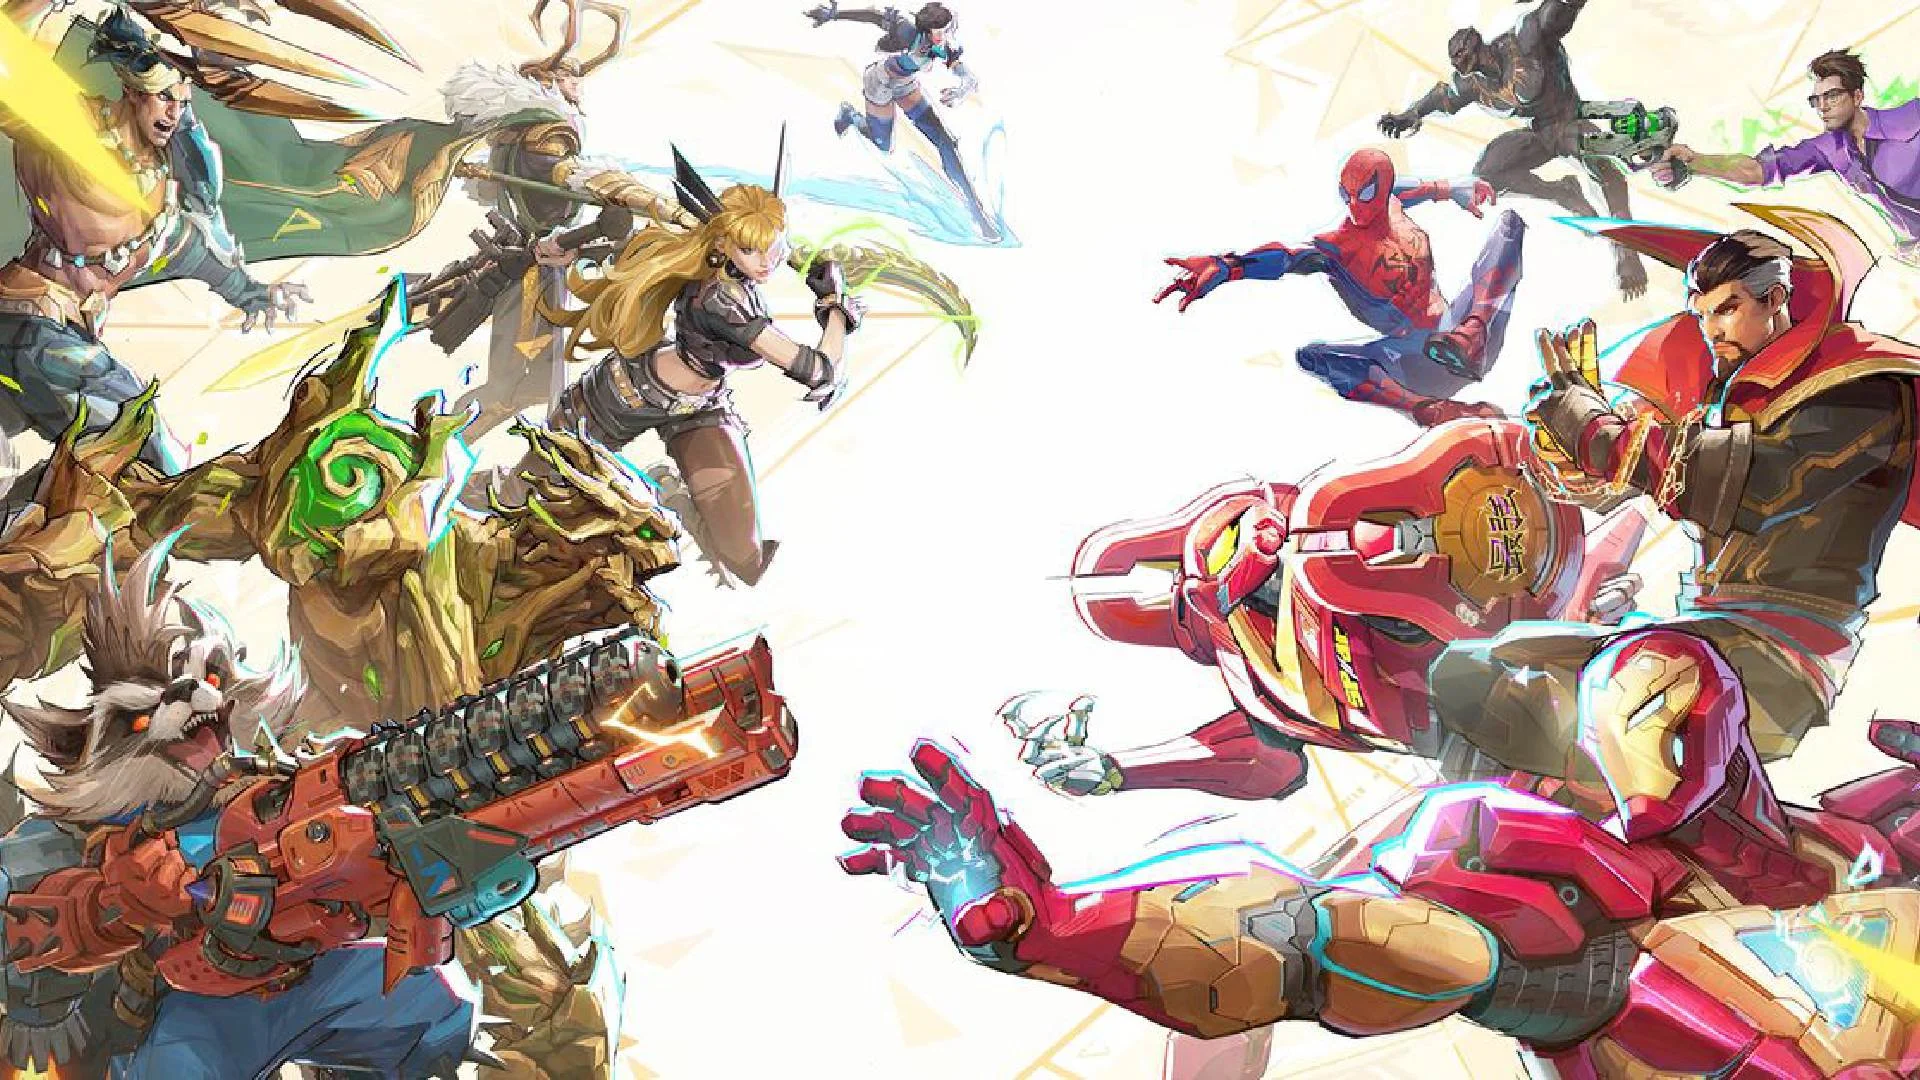 Multiplayer action game Marvel Rivals has its first trailer